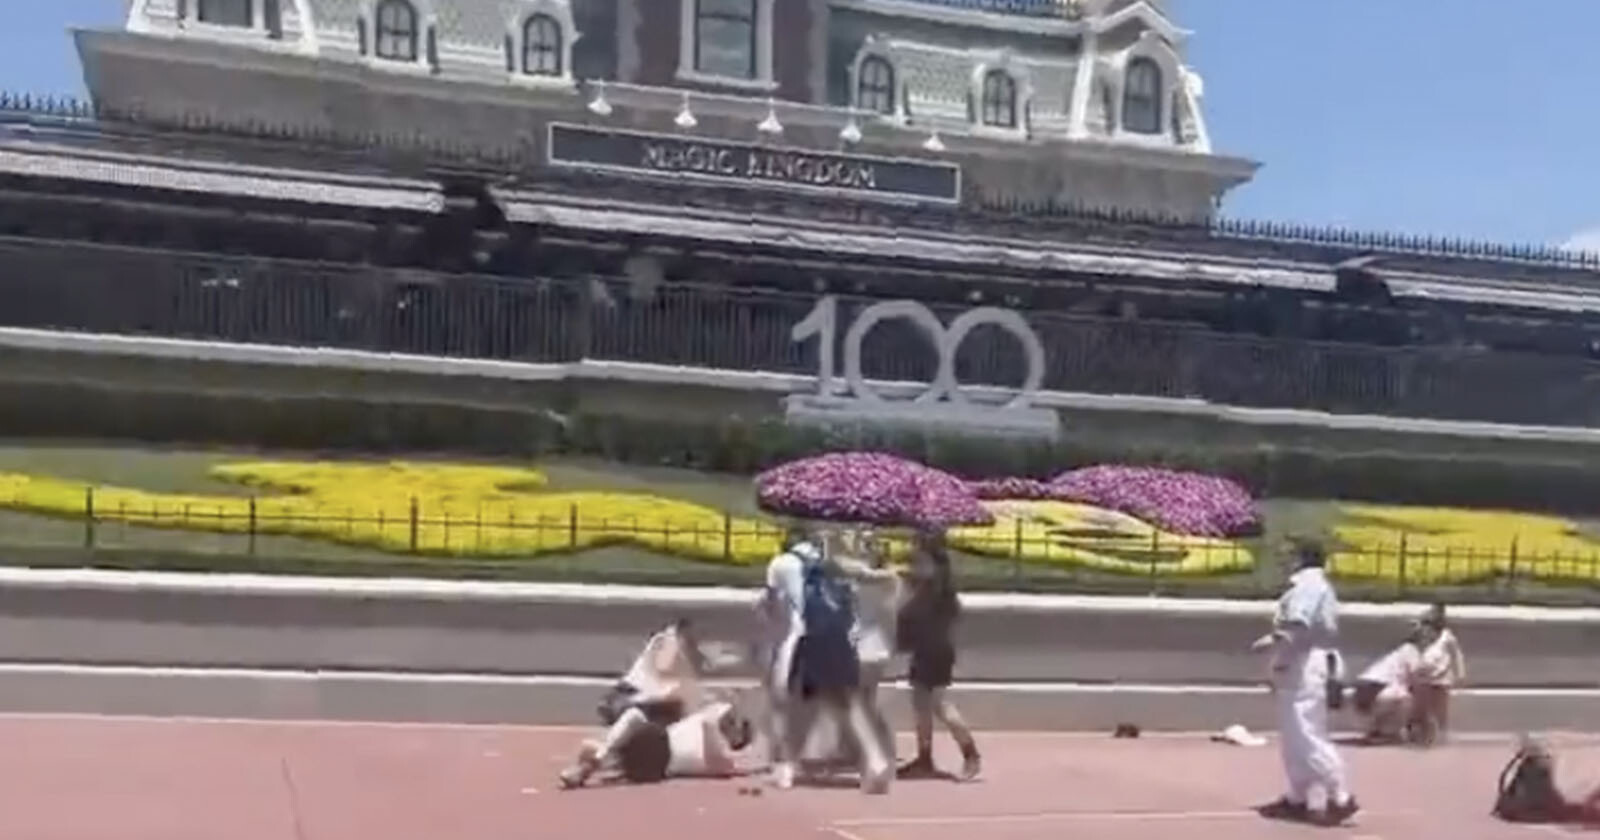  two families brawl over photo opportunity disney world 